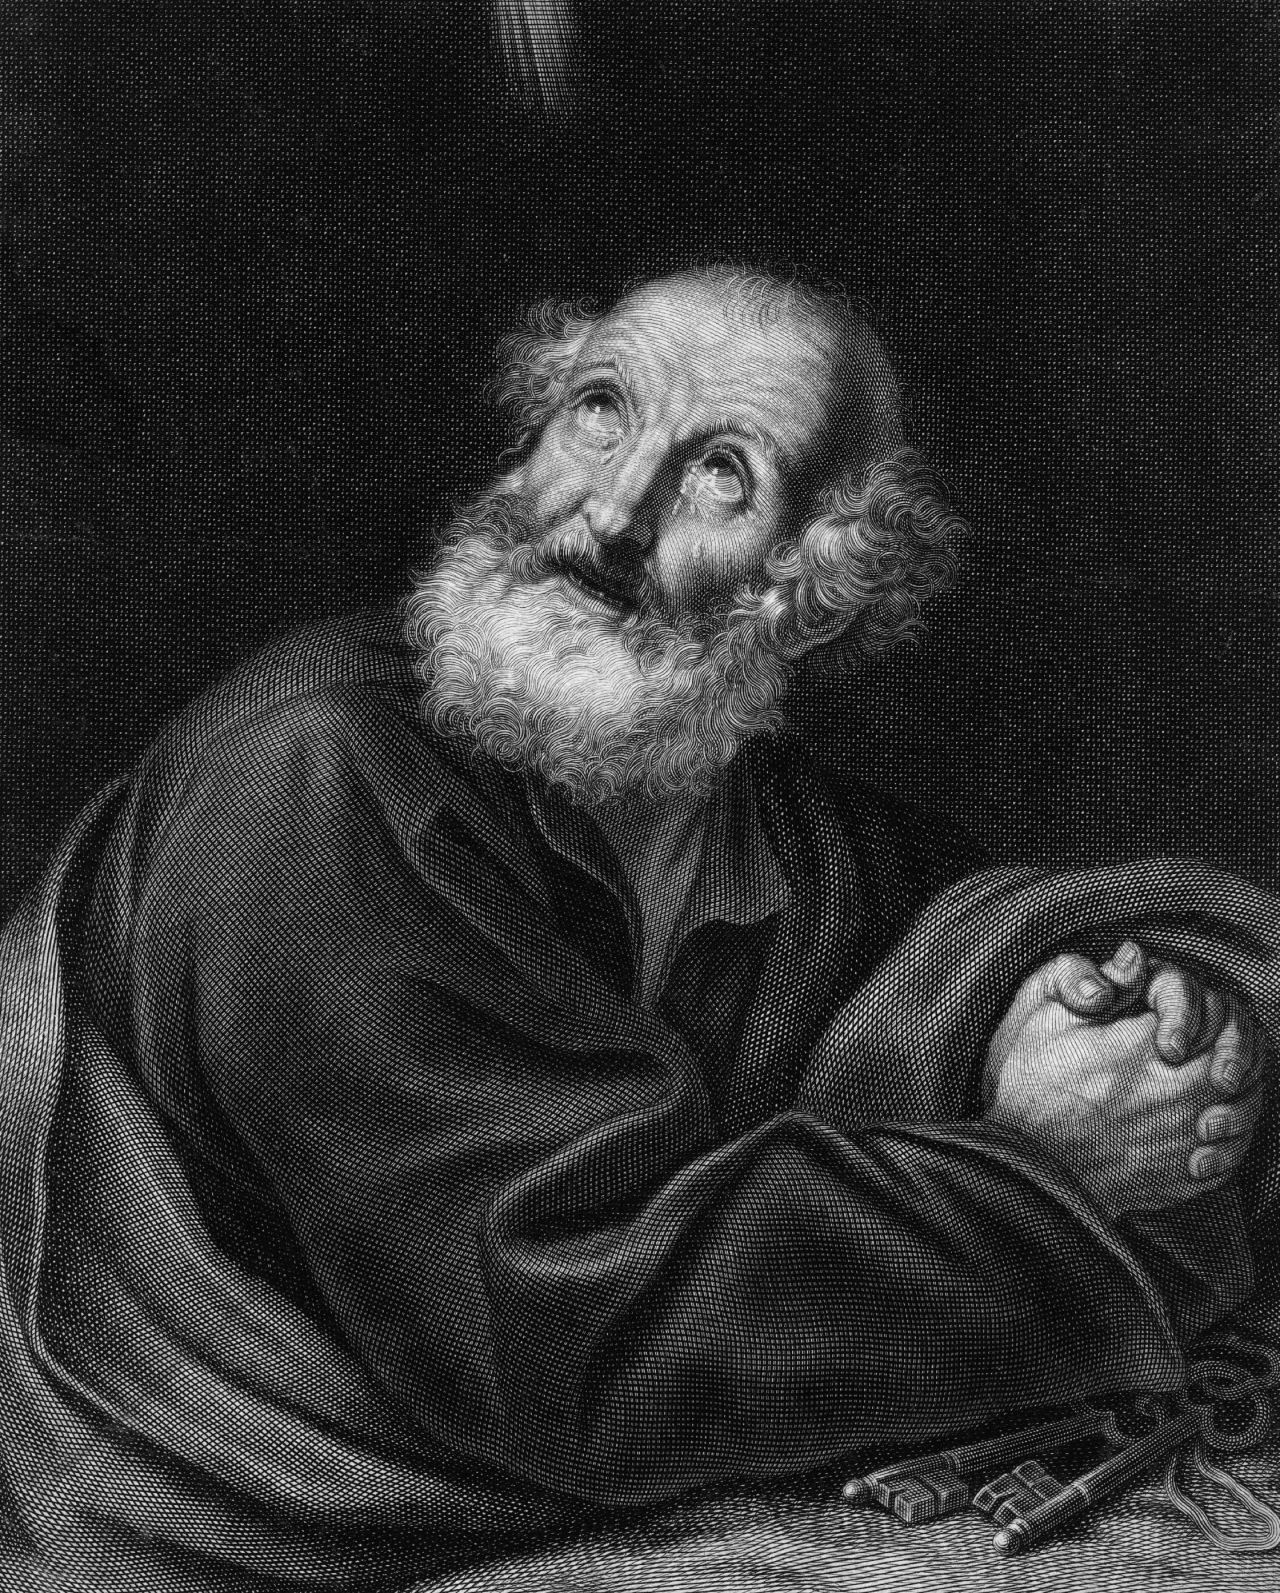 Christians believe that St Peter was a fisherman on the shores of Lake Galilee who became a follower and friend of Jesus.